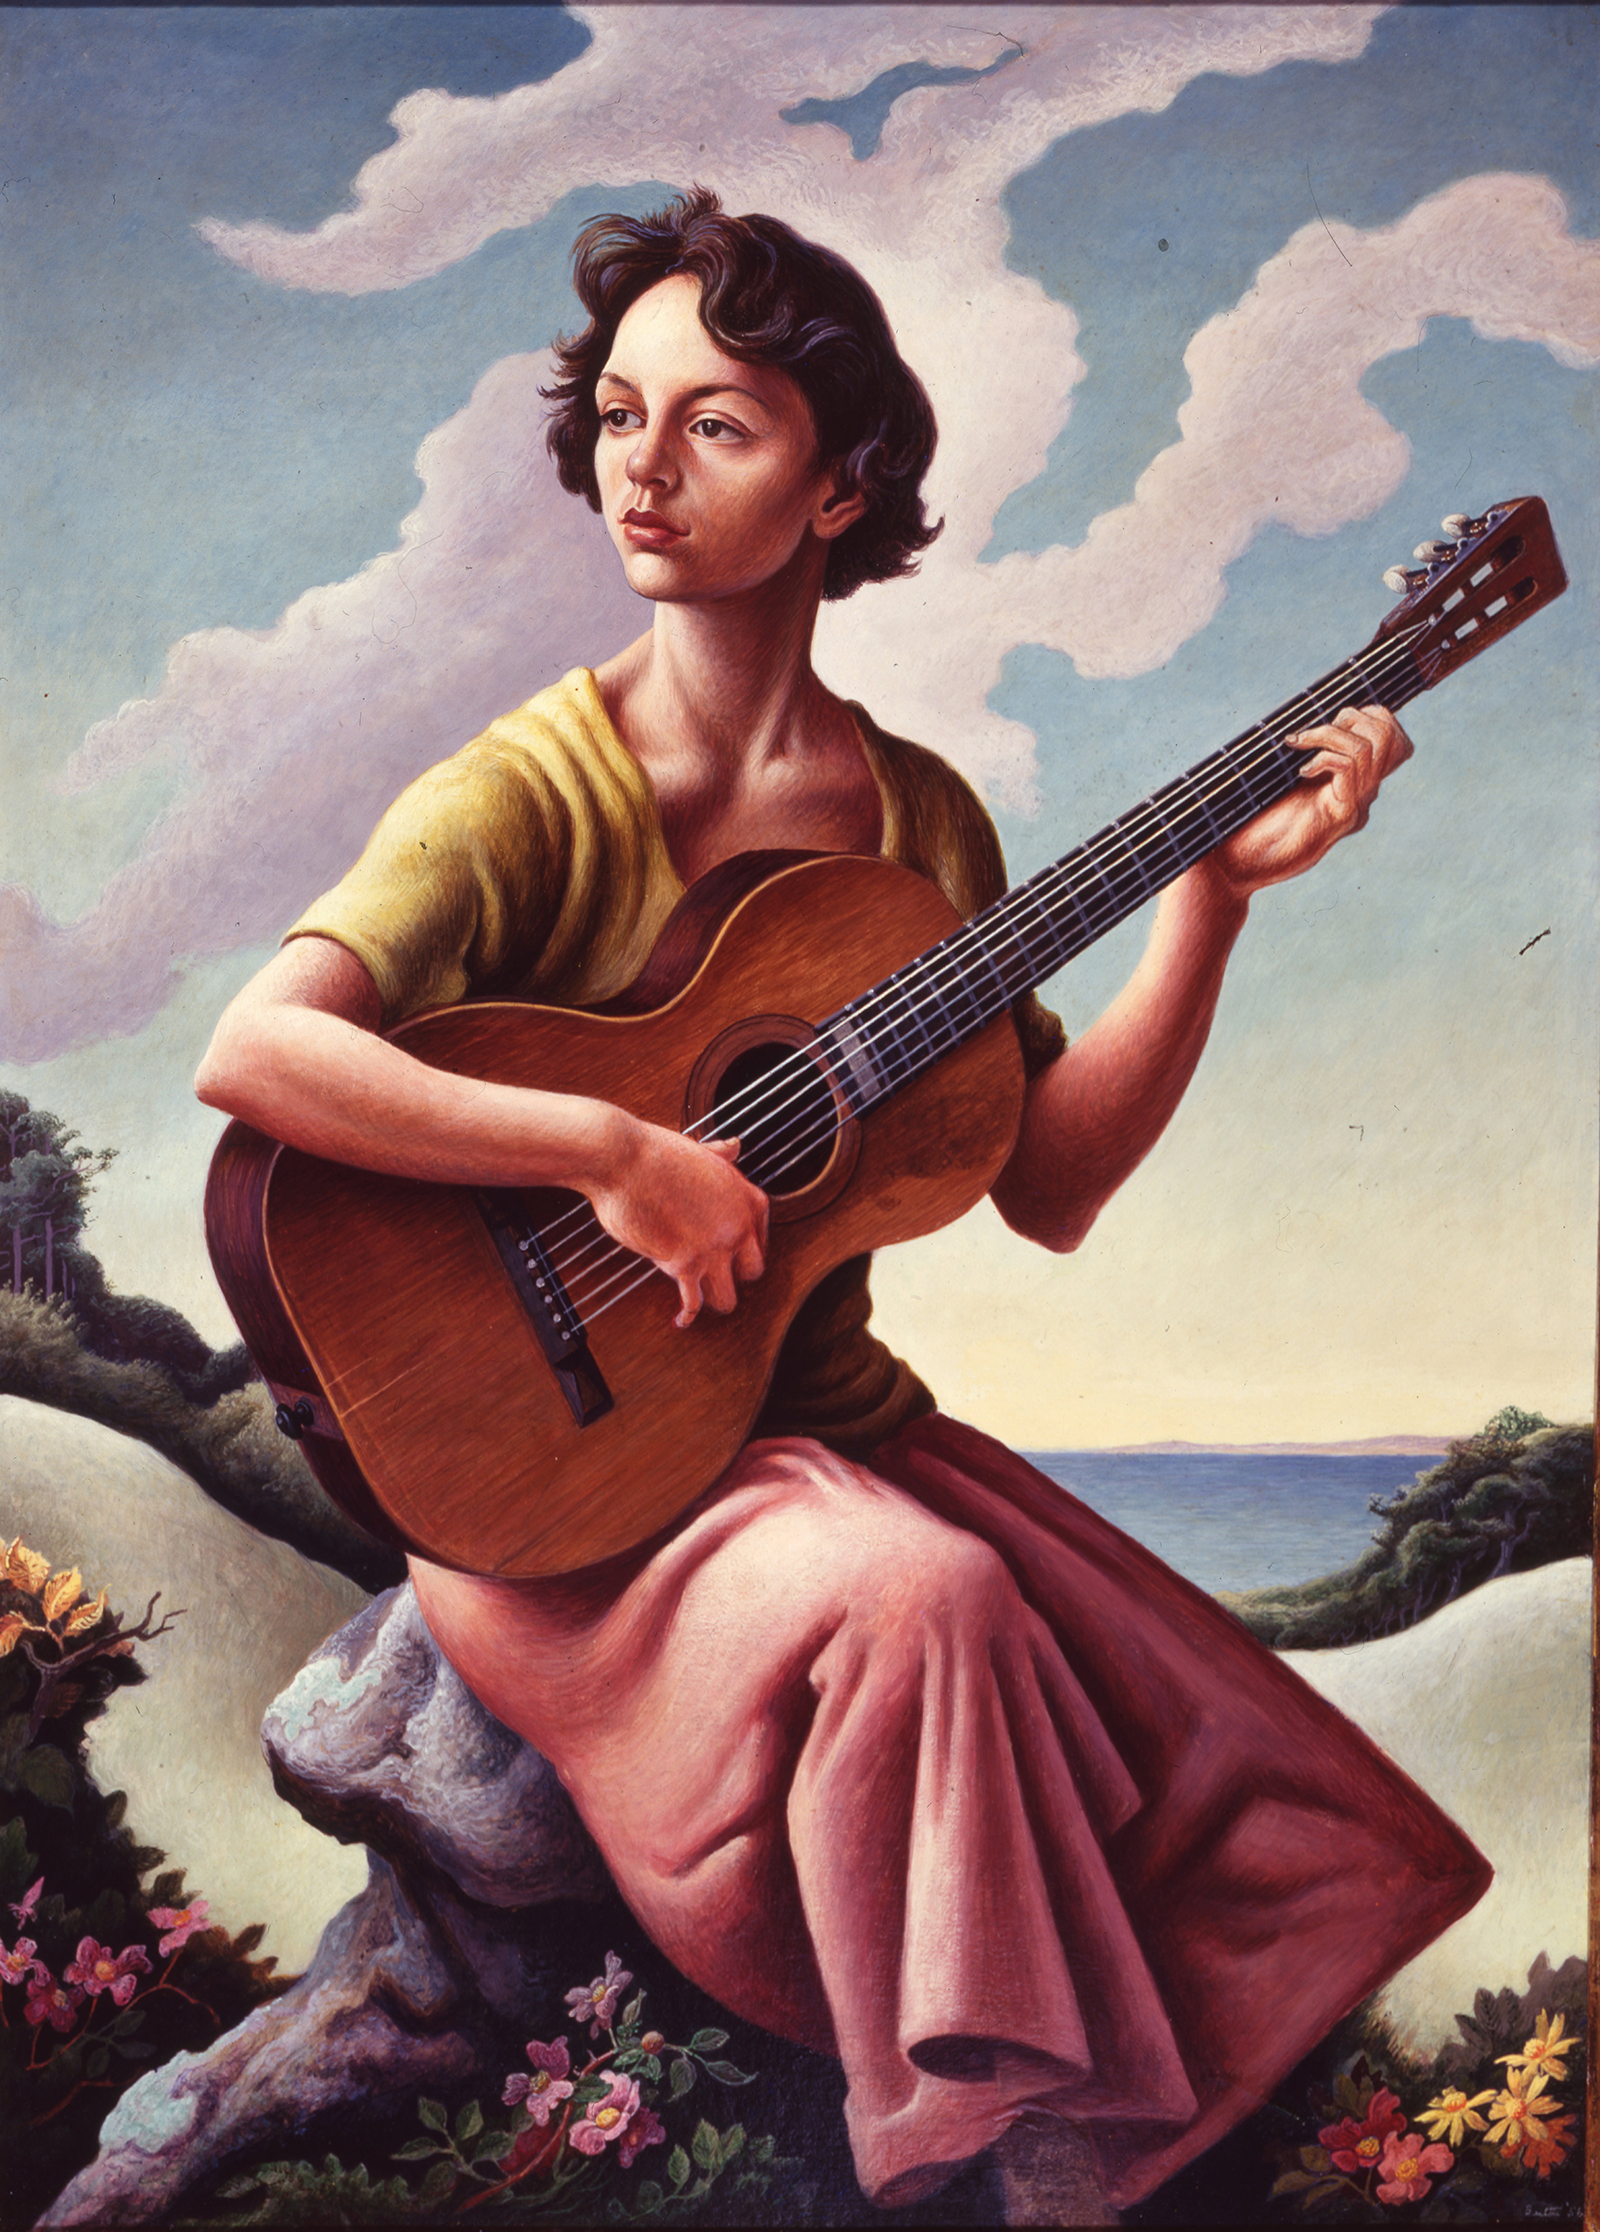 Woman sitting on a rock gazing off in the distance playing a guitar